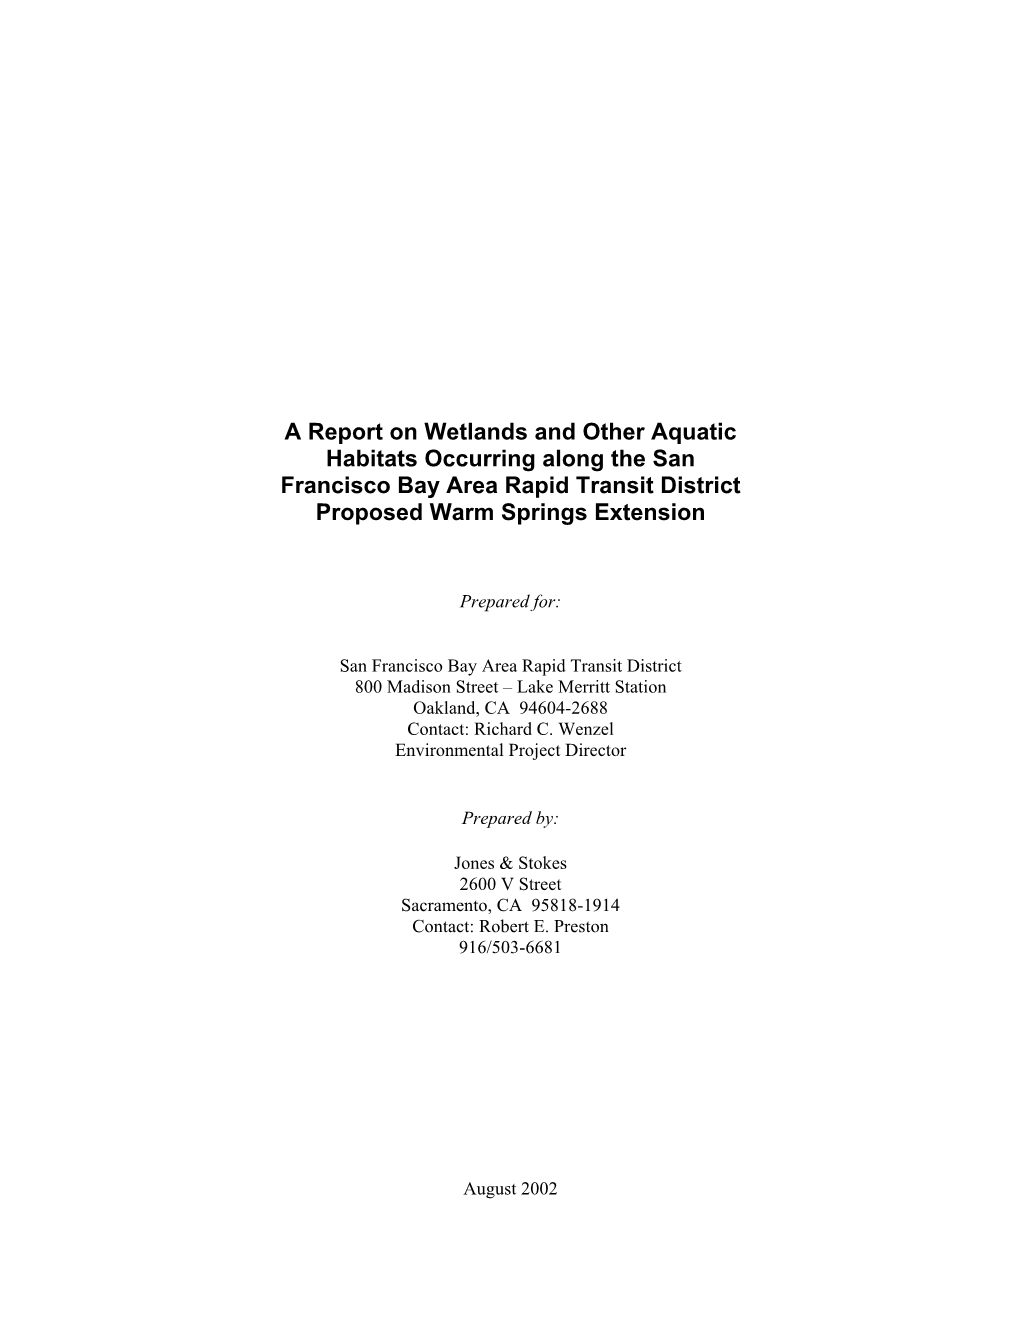 A Report on Wetlands and Other Aquatic Habitats Occurring Along the San Francisco Bay Area Rapid Transit District Proposed Warm Springs Extension